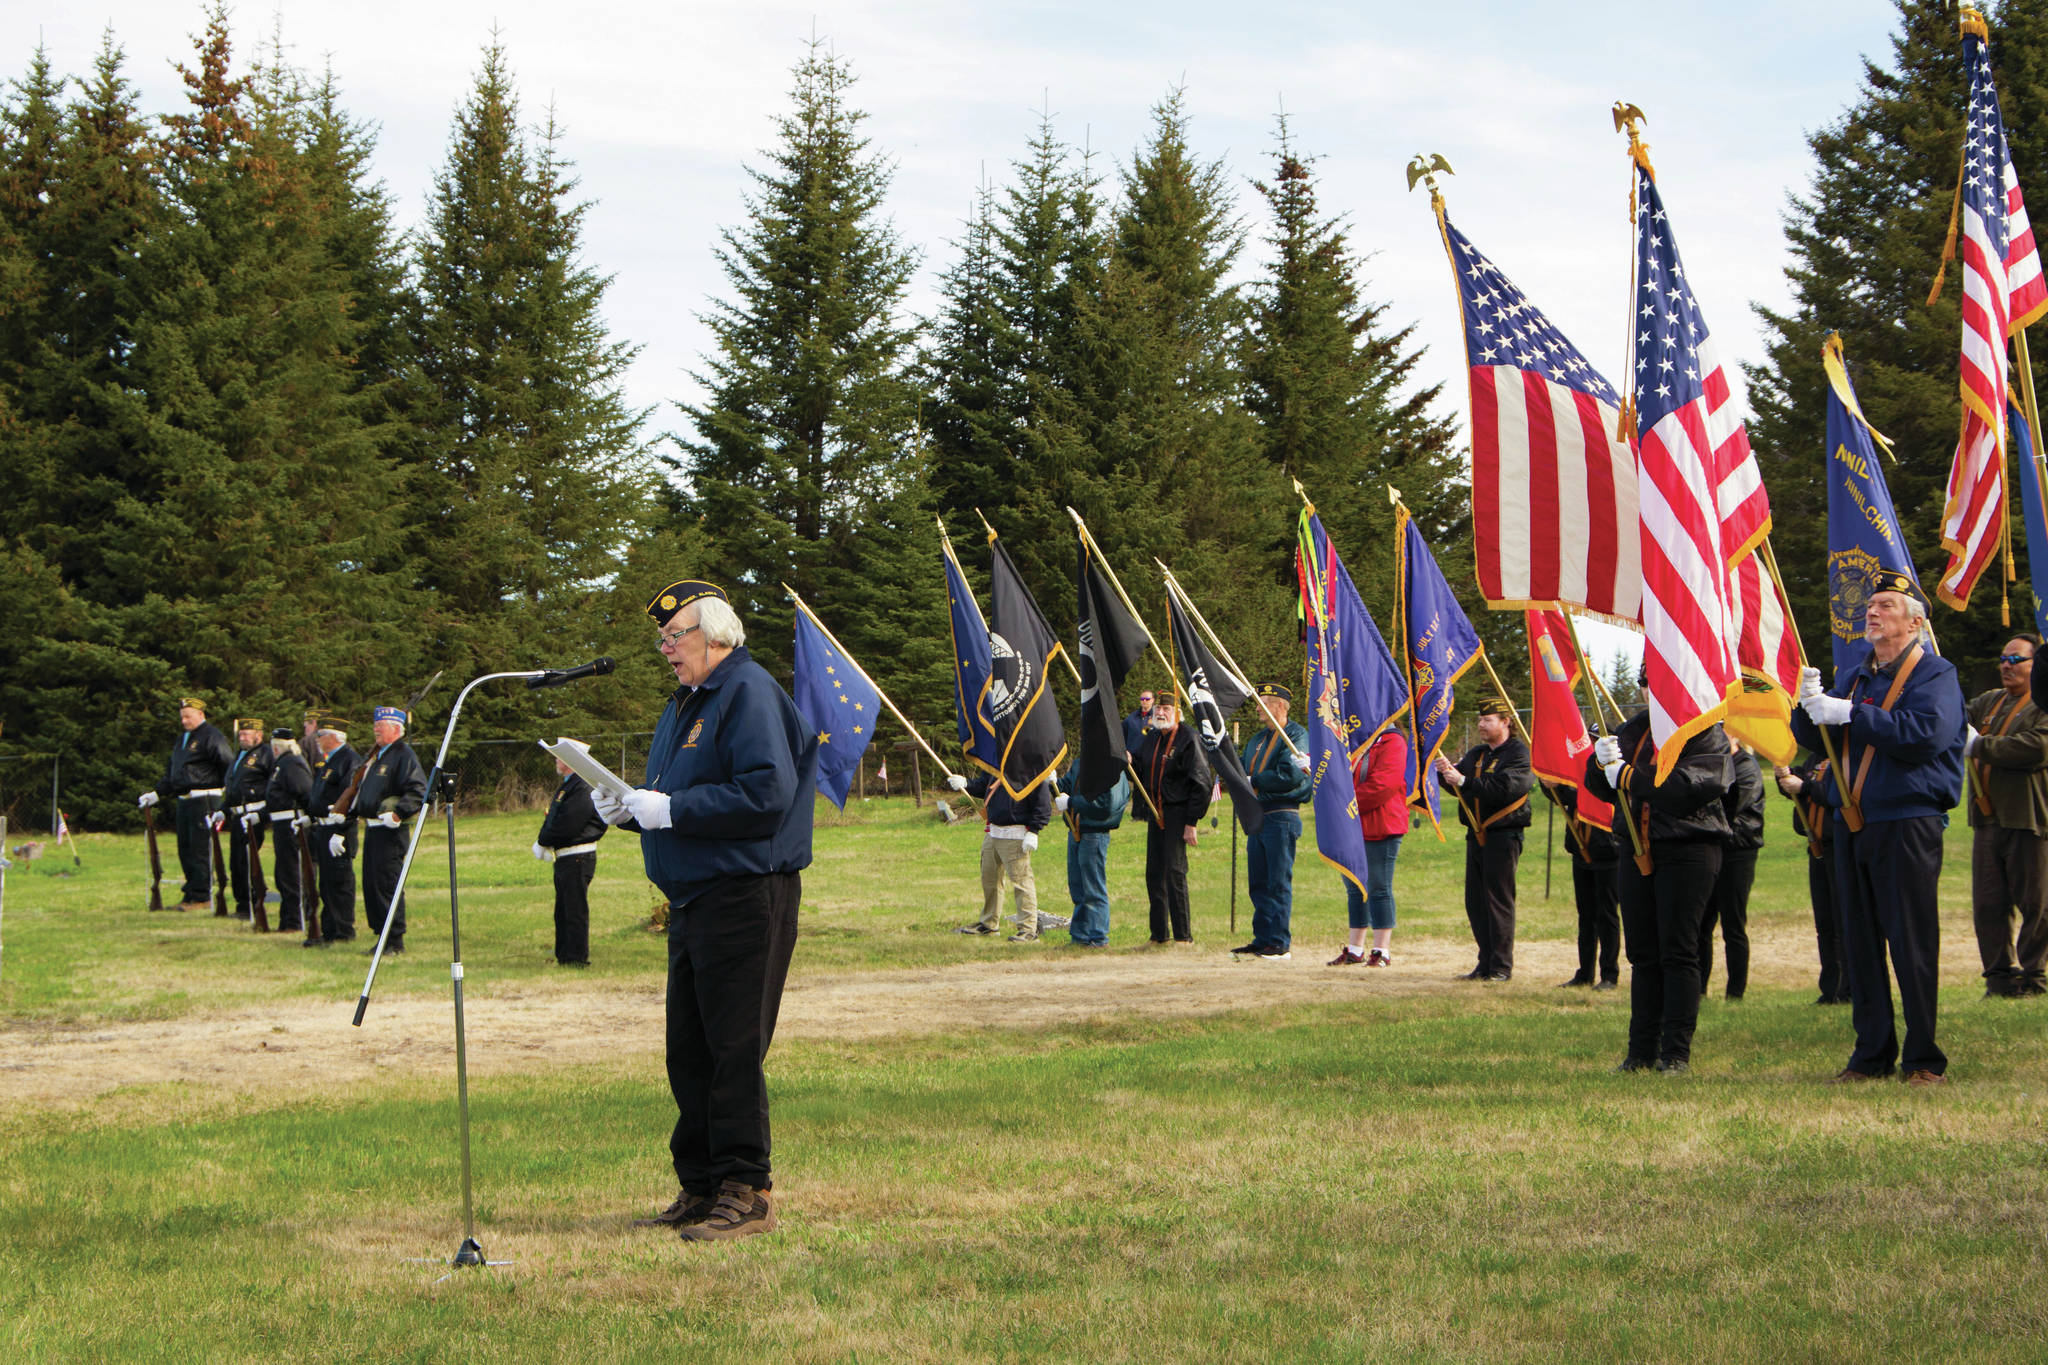 American Legion Post 16 Commander Eileen Faulkner served as the keynote speaker during the 2021 Memorial Day service held at Hickerson Memorial Cemetery on May 31. (Photo by Sarah Knapp/Homer News)